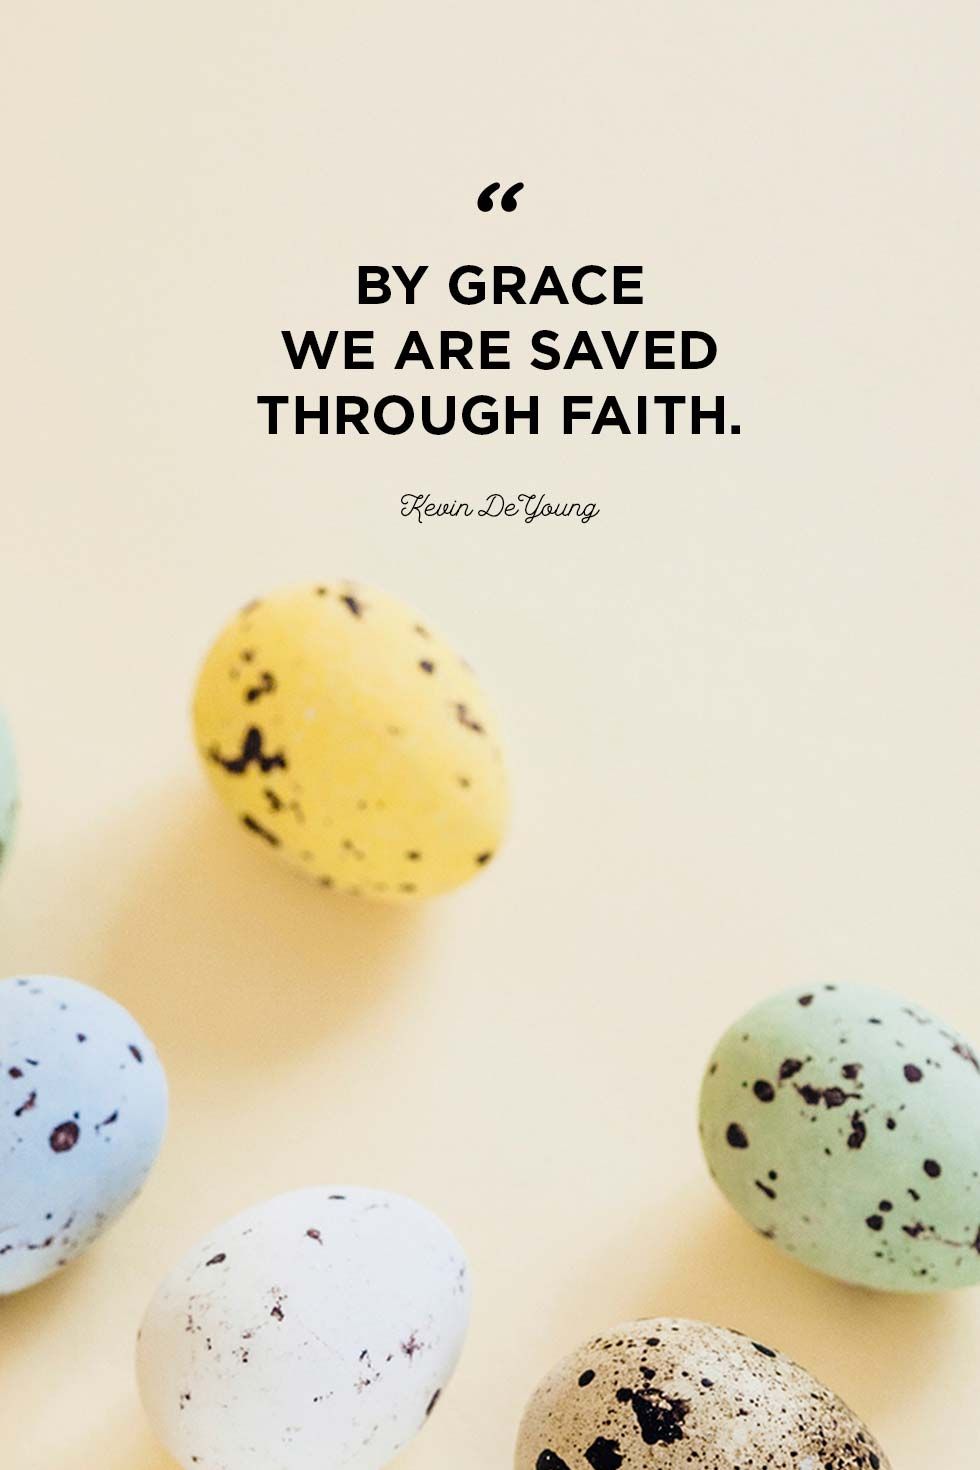 by grace we are saved through faith. kean de young